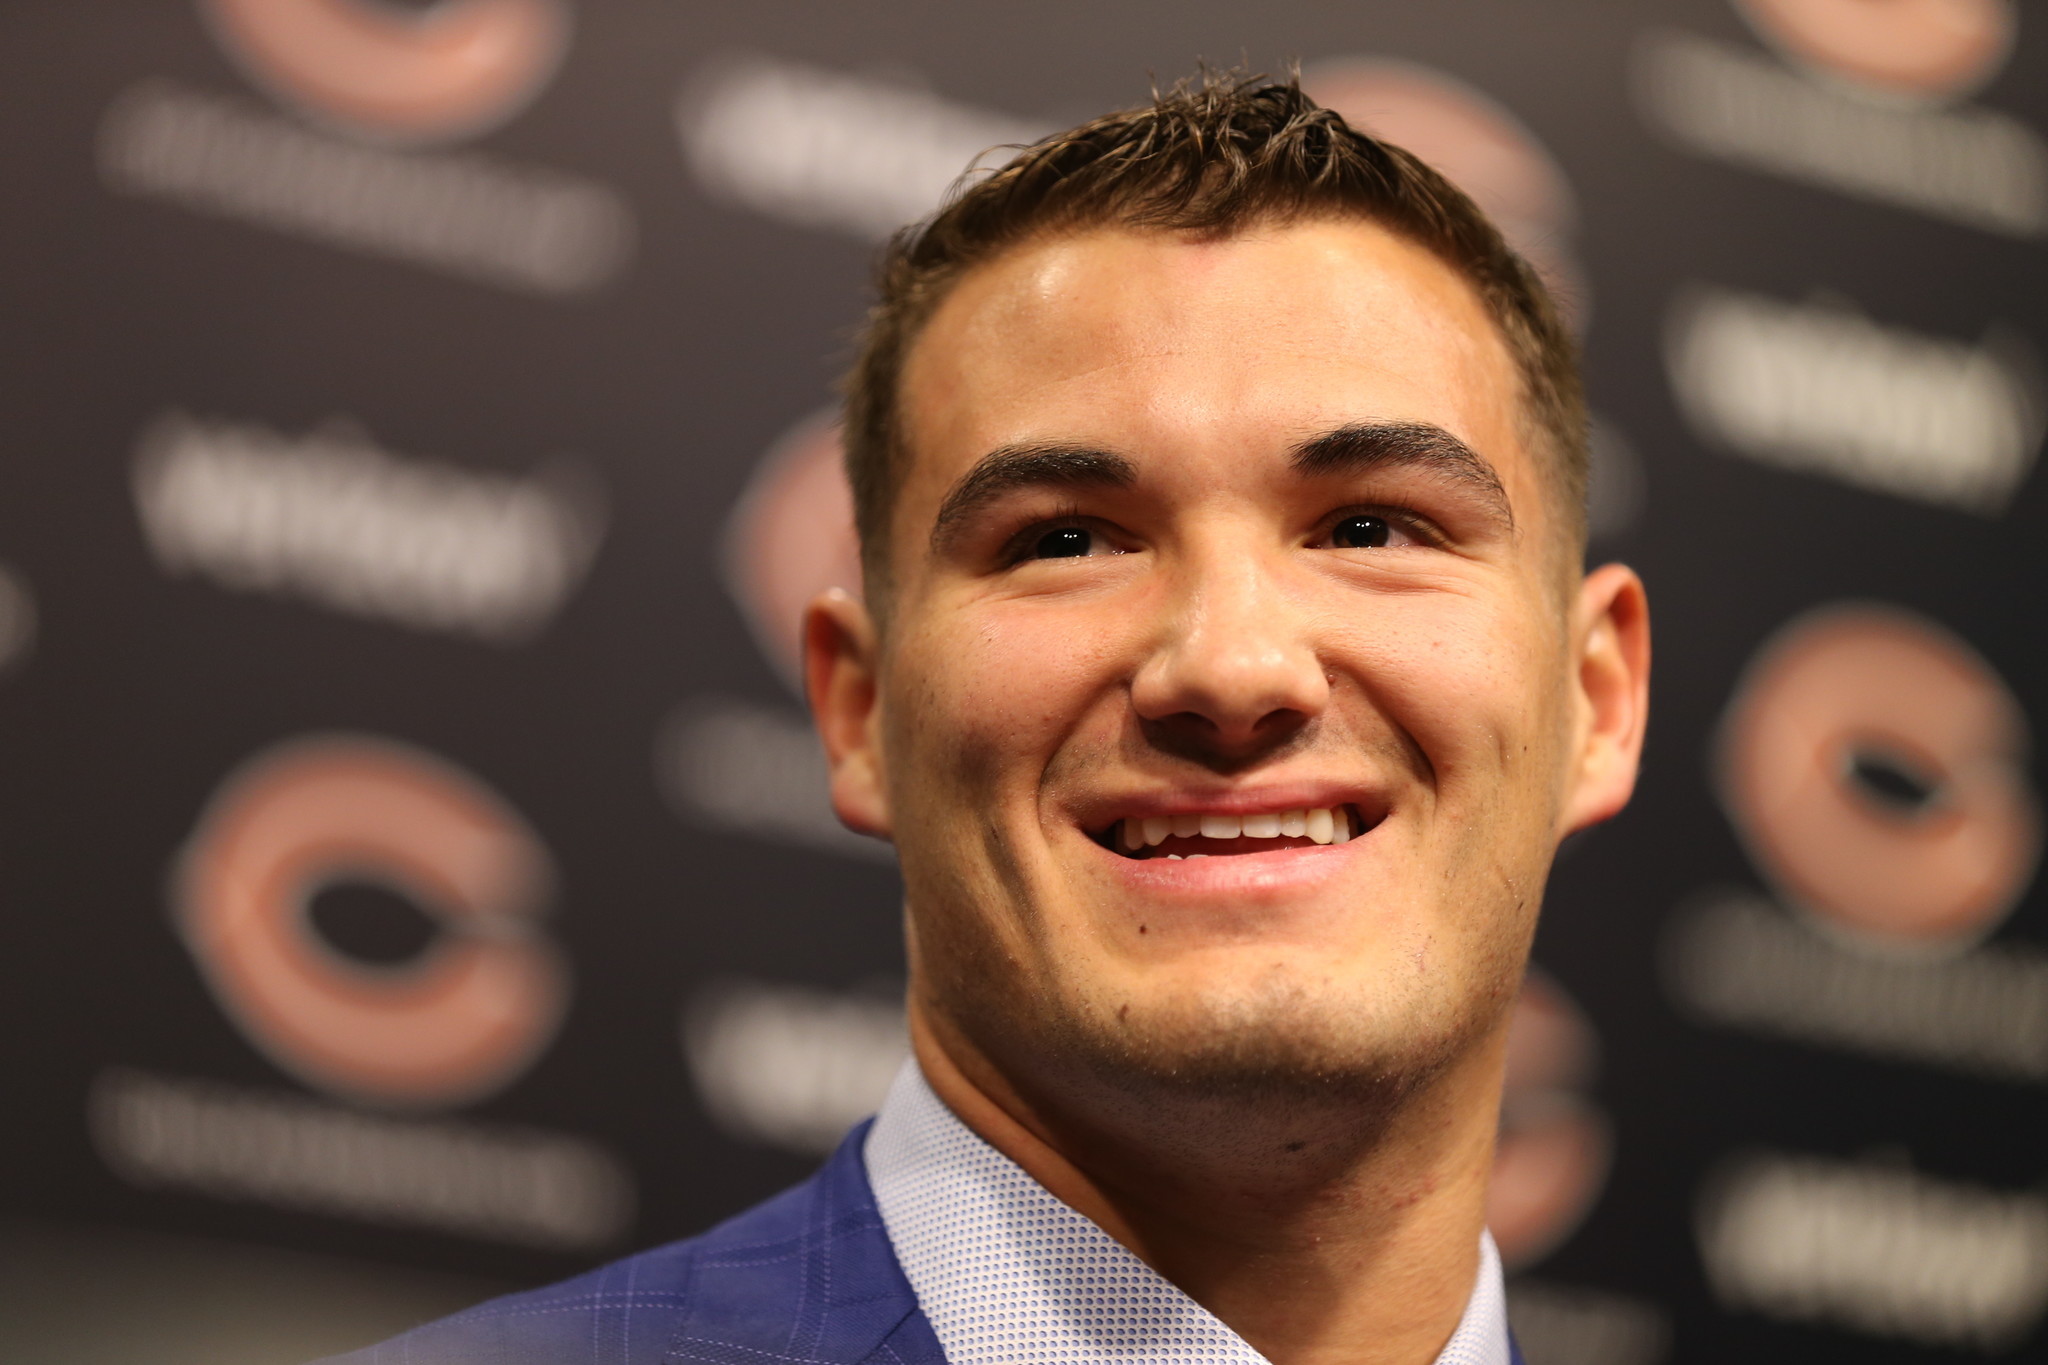 ct-mitch-trubisky-bears-chicago-hope-spt-0521-20170519